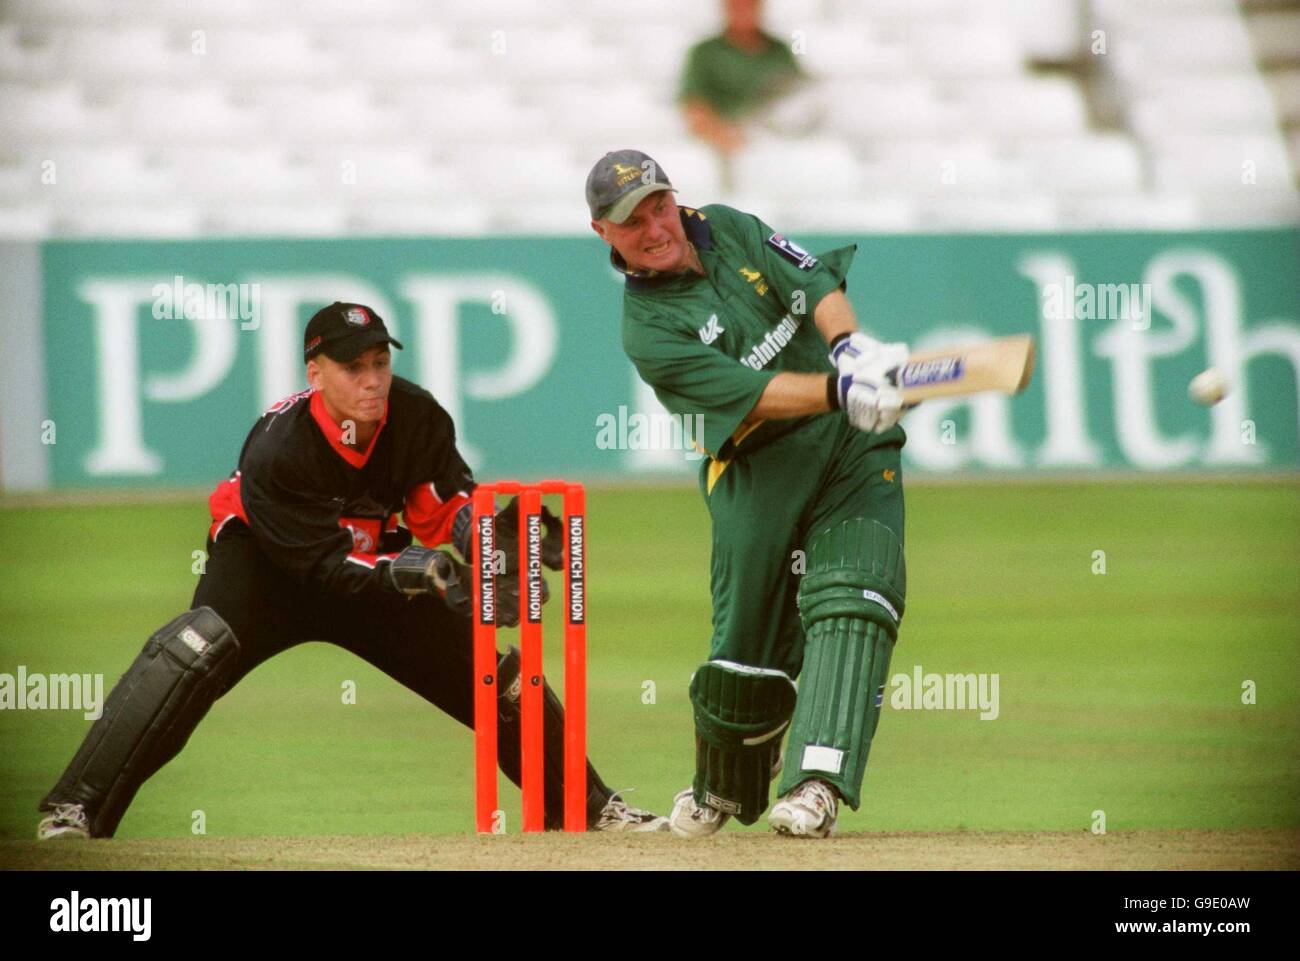 Nottinghamshire Outlaws' Paul Johnson (r) hits a boundary, watched by Glamorgan Dragons' Mark Wallace (l) Stock Photo